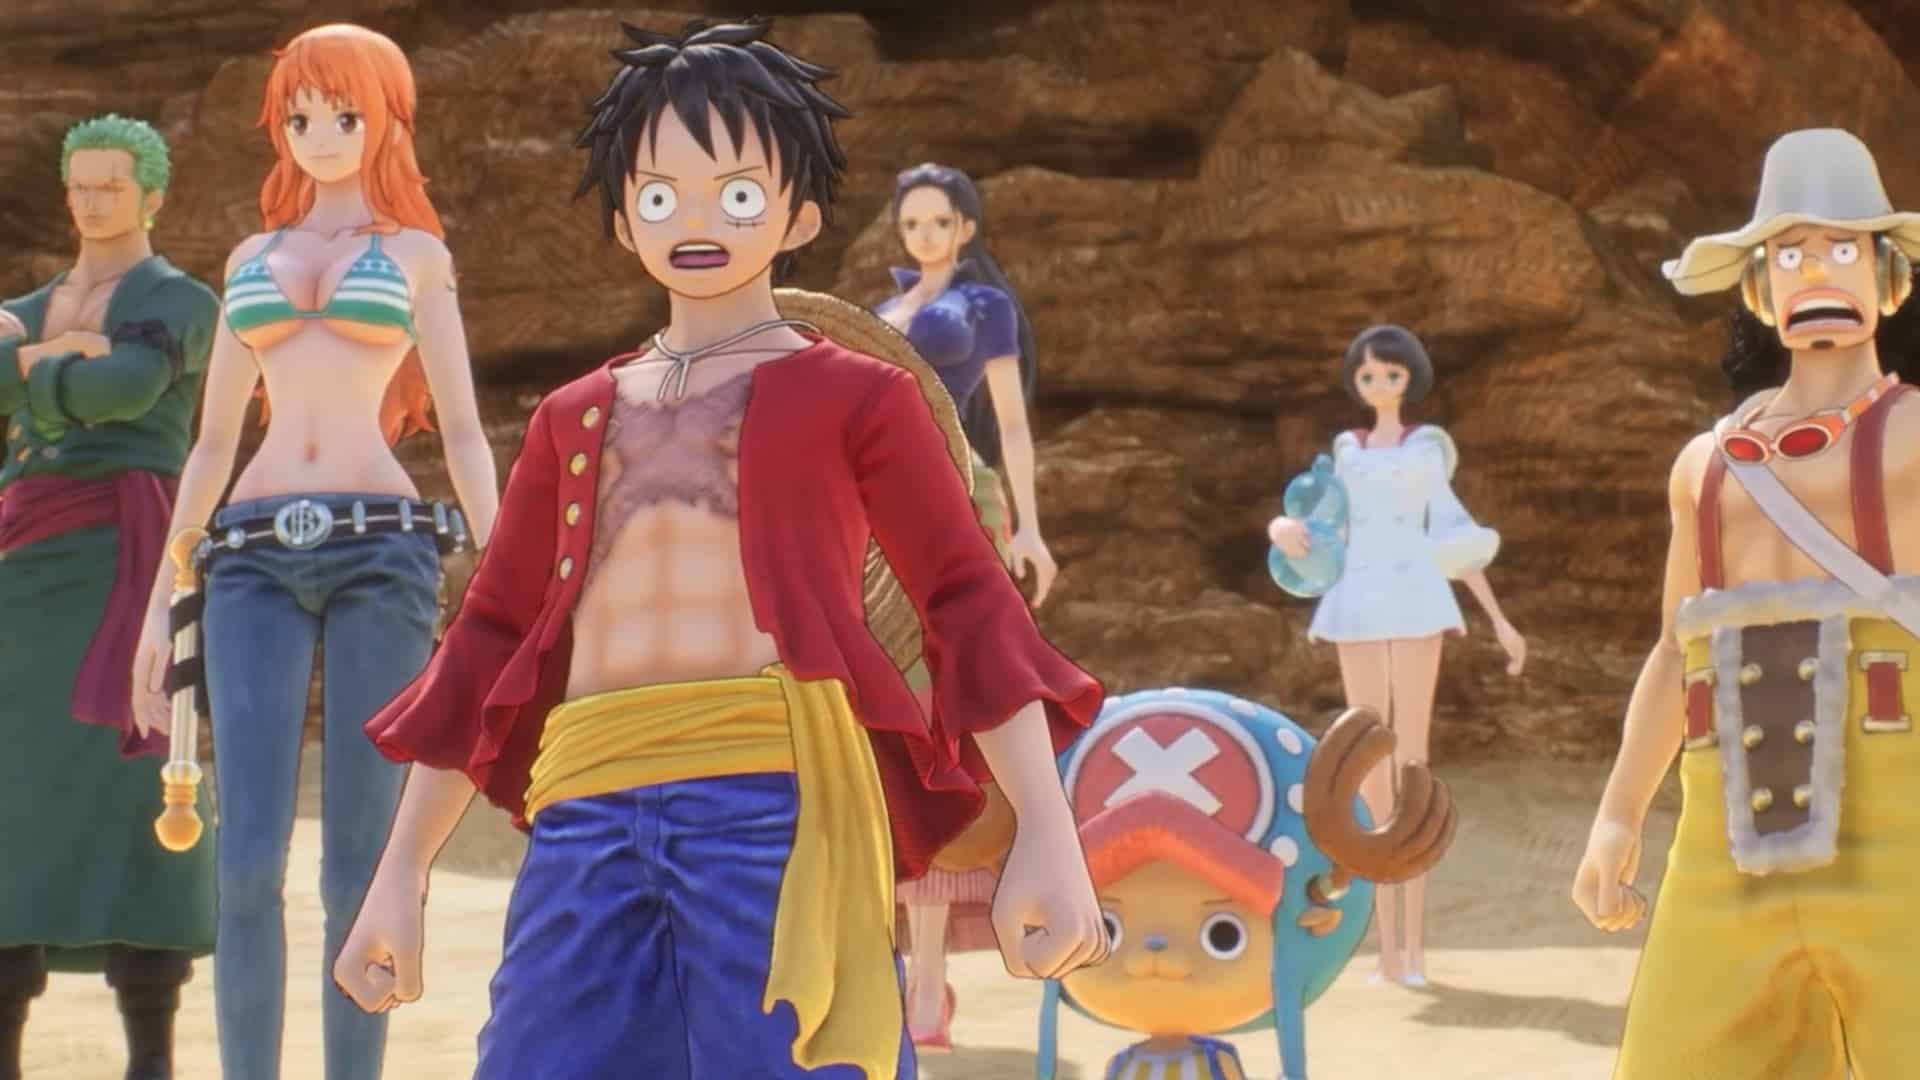 One Piece: Odyssey Review (PS5) - One Of The Best Anime And Manga Video  Game Adaptations - PlayStation Universe